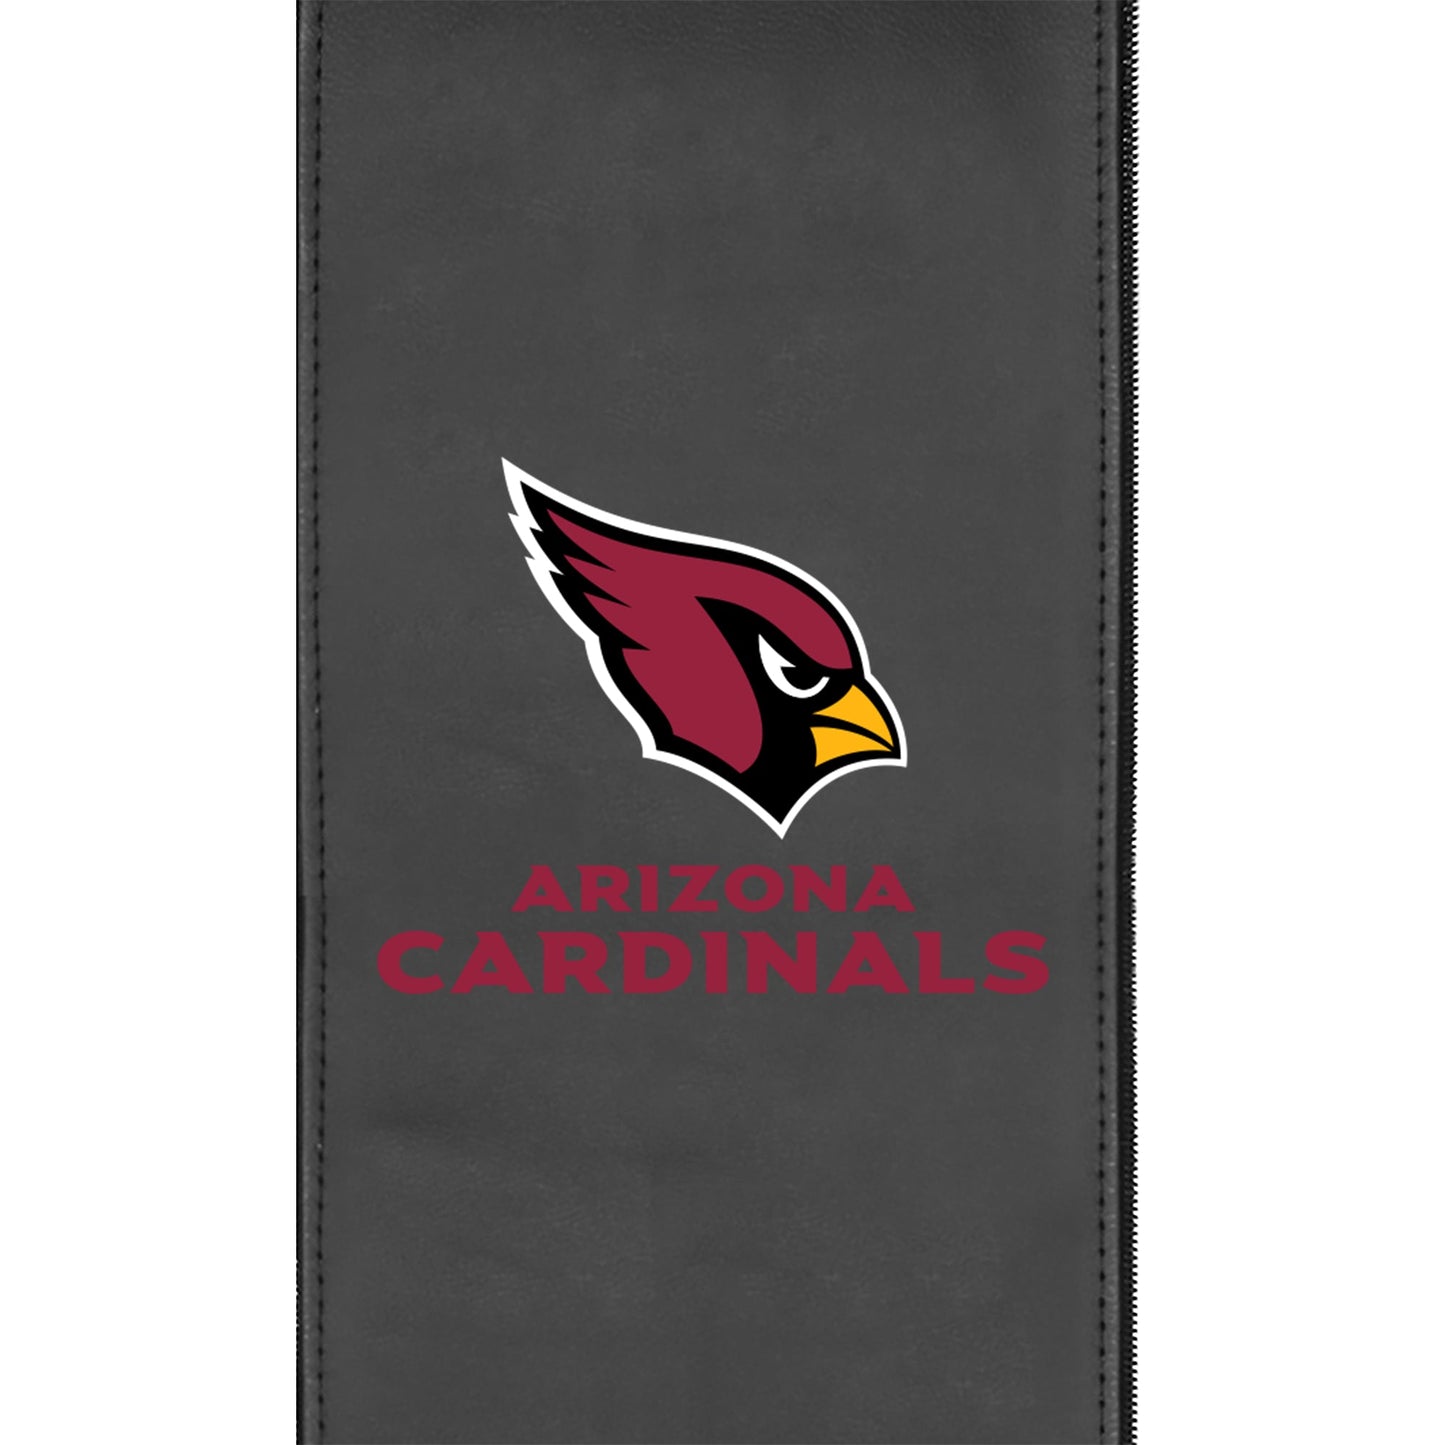 Silver Club Chair with Arizona Cardinals Secondary Logo